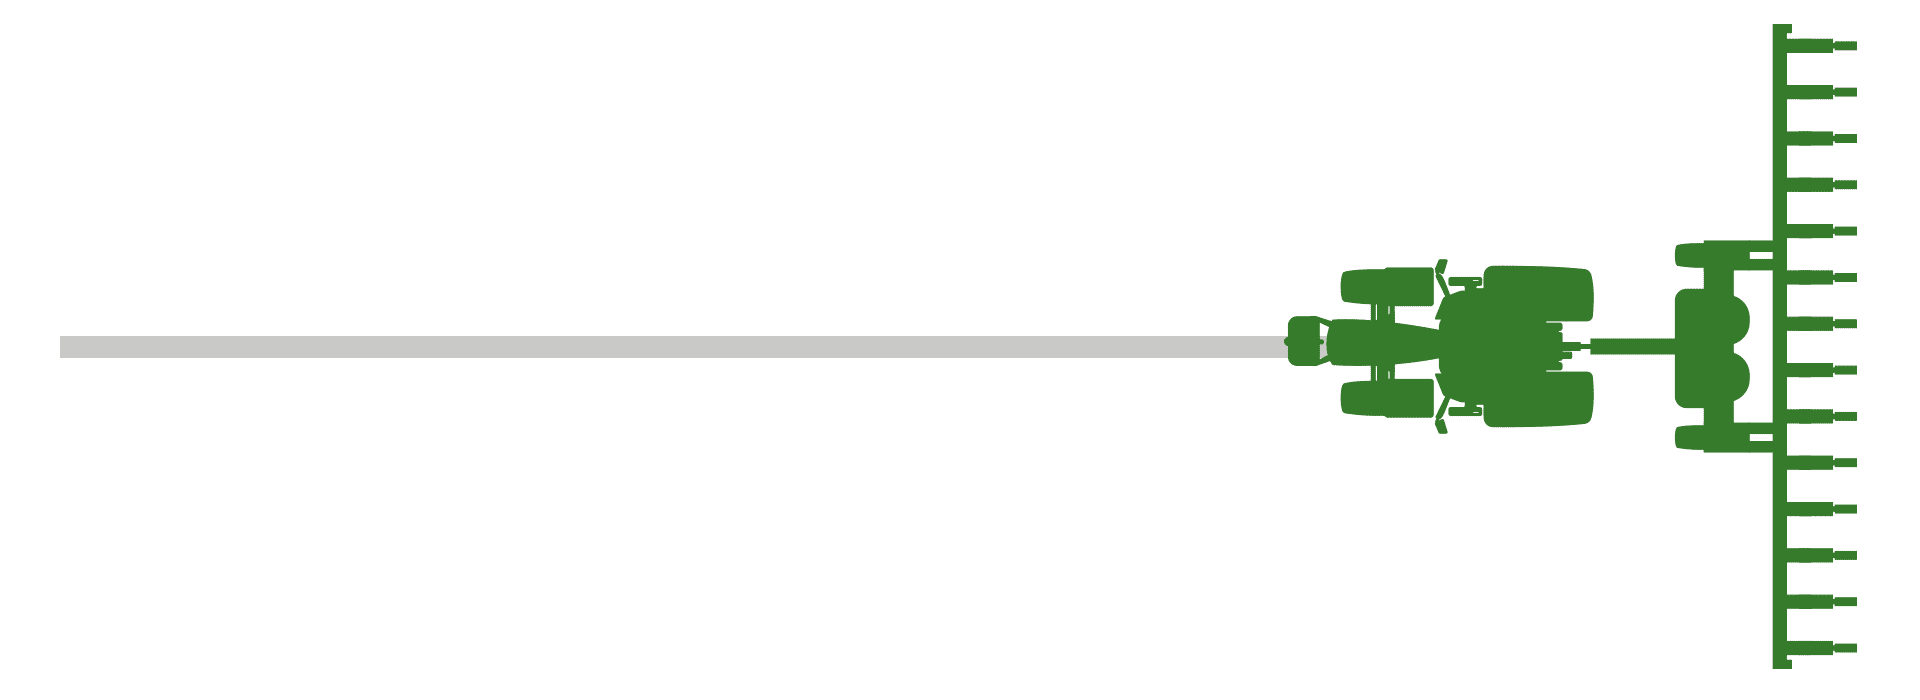 animation of a green tractor following a gray line